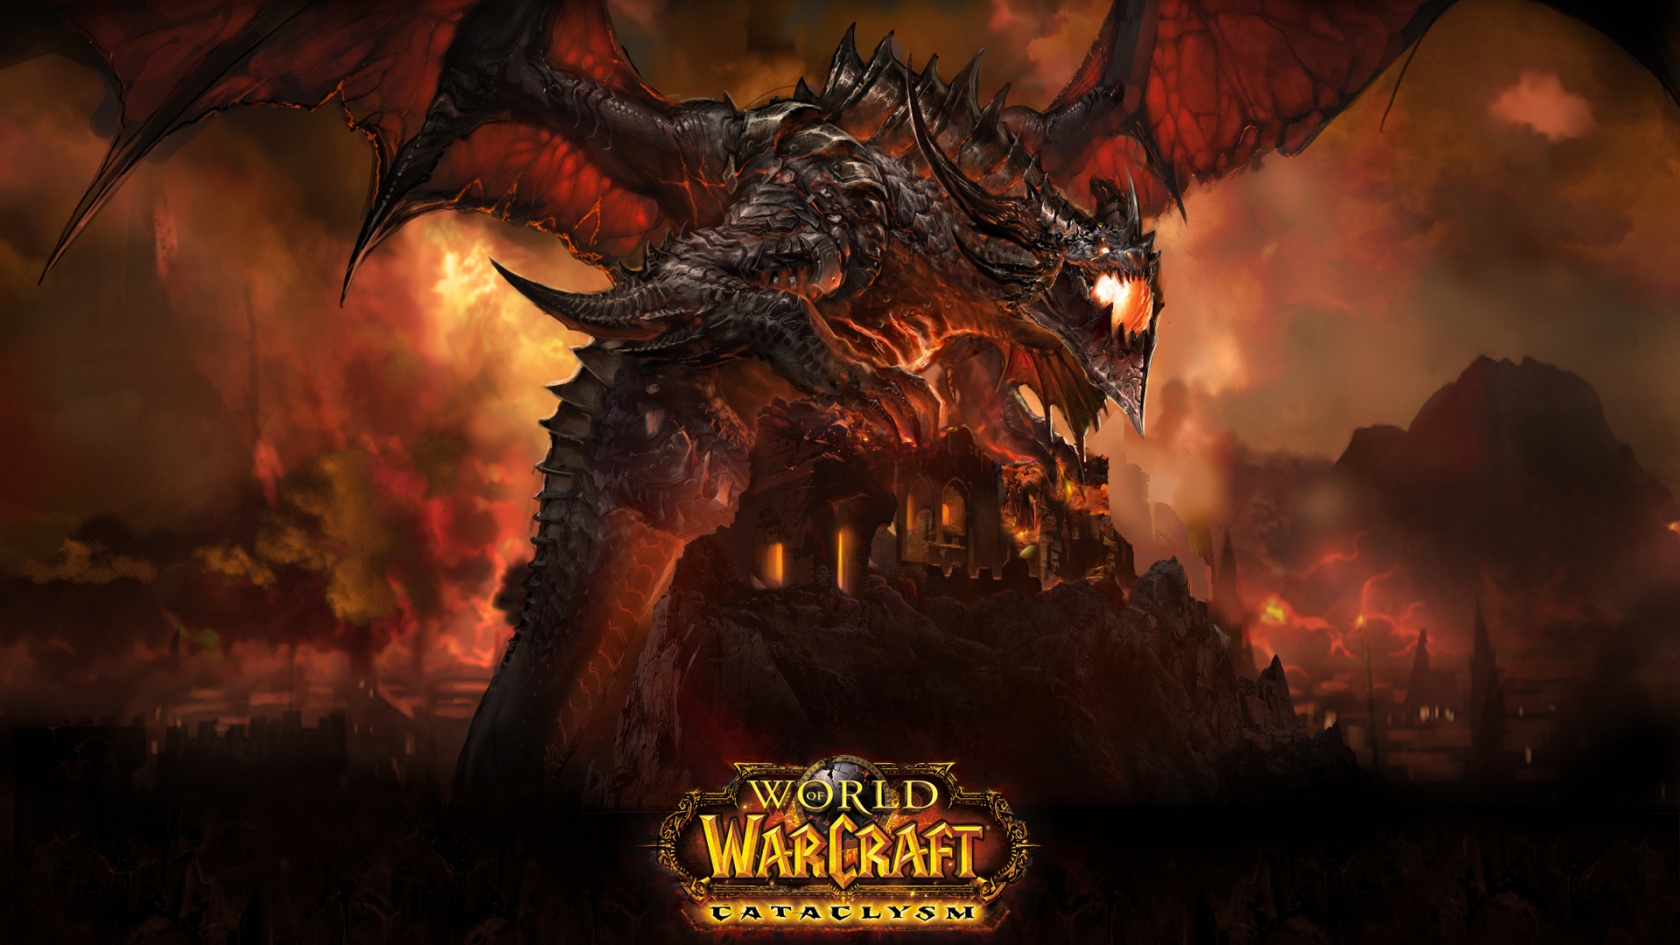 Deathwing WoW Cataclysm for 1680 x 945 HDTV resolution